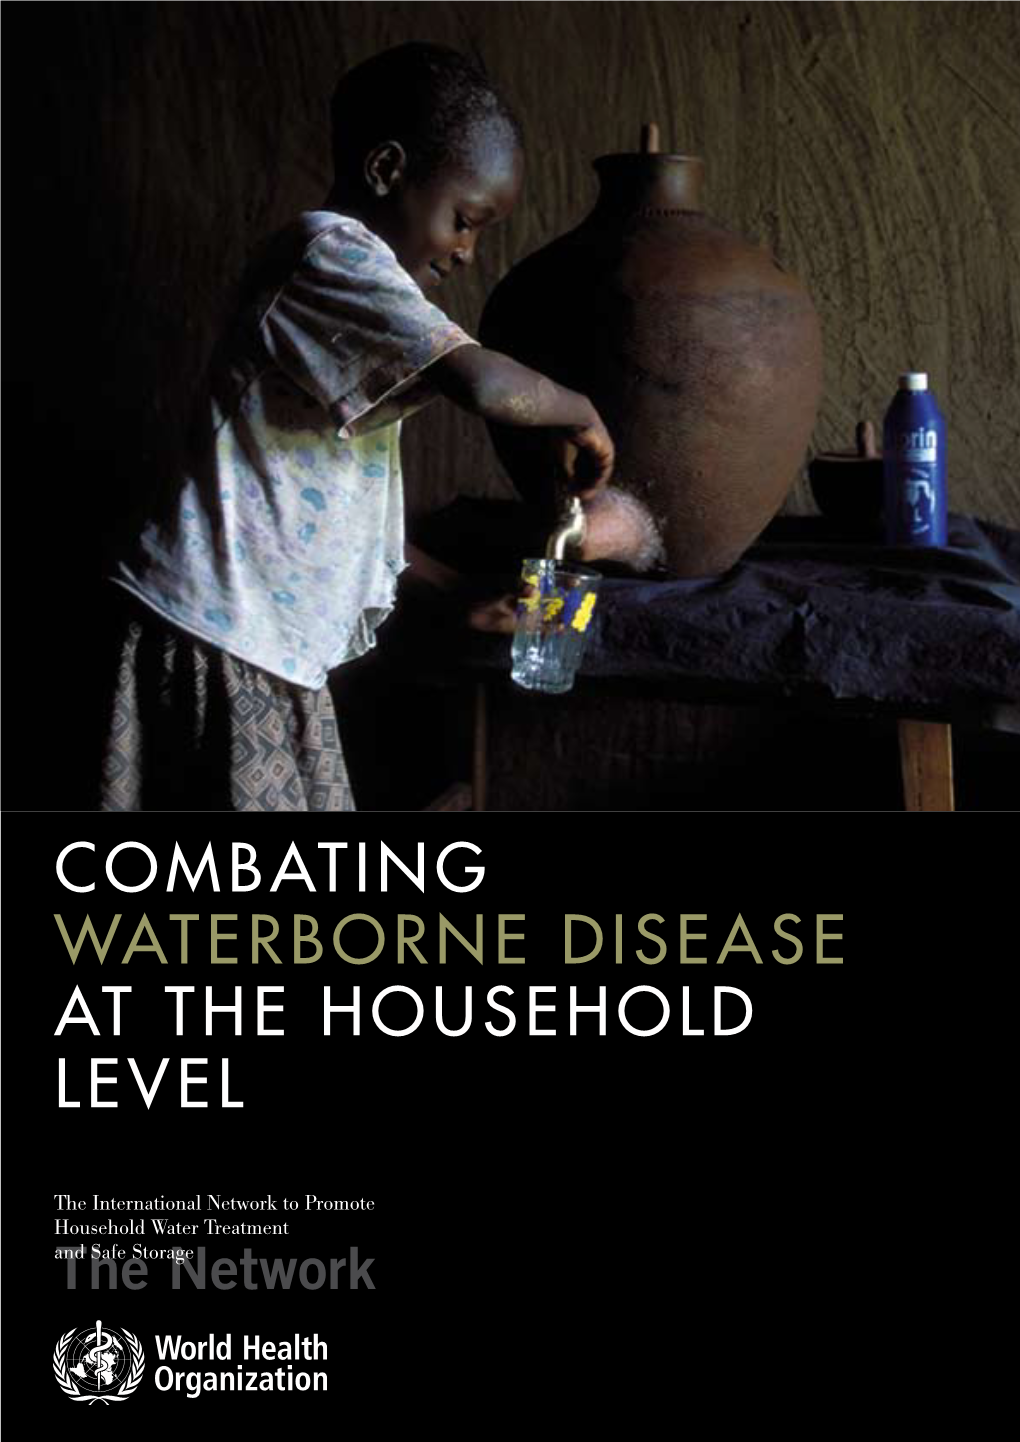 Combating Waterborne Disease at the Household Level